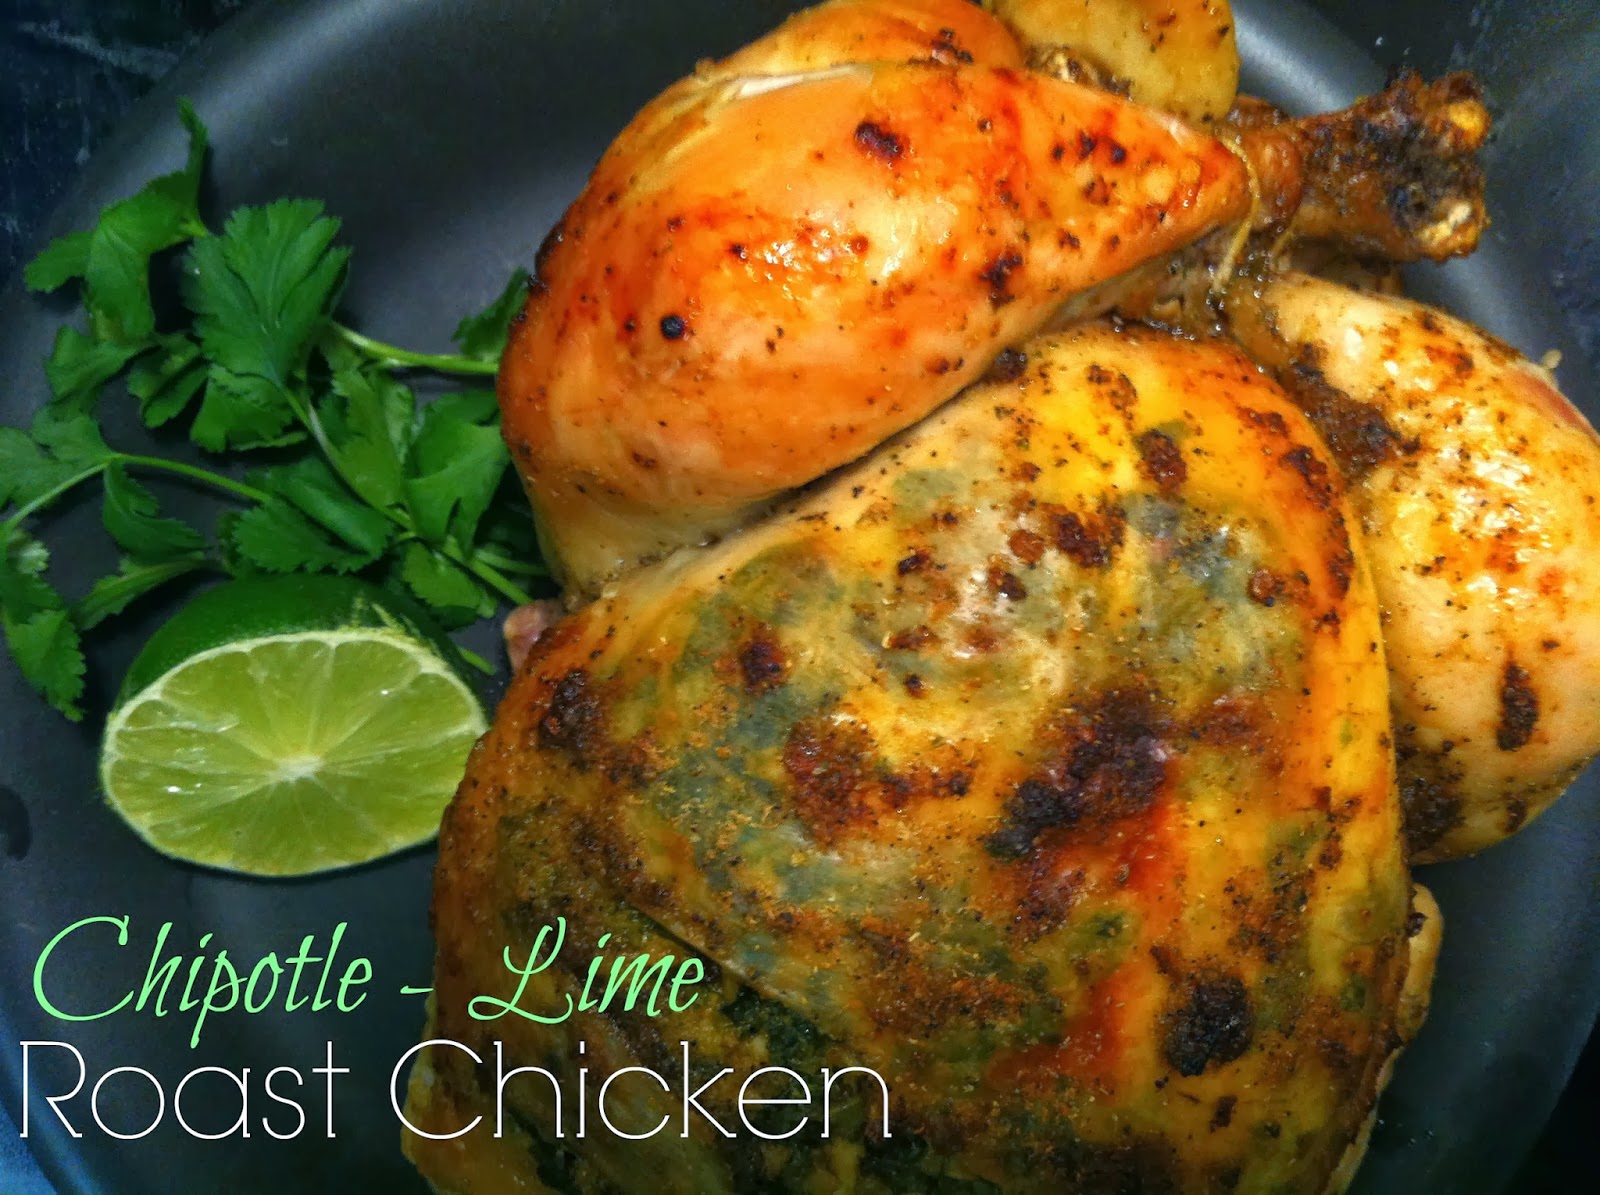 Food Swoon: Chipotle Lime Roast Chicken